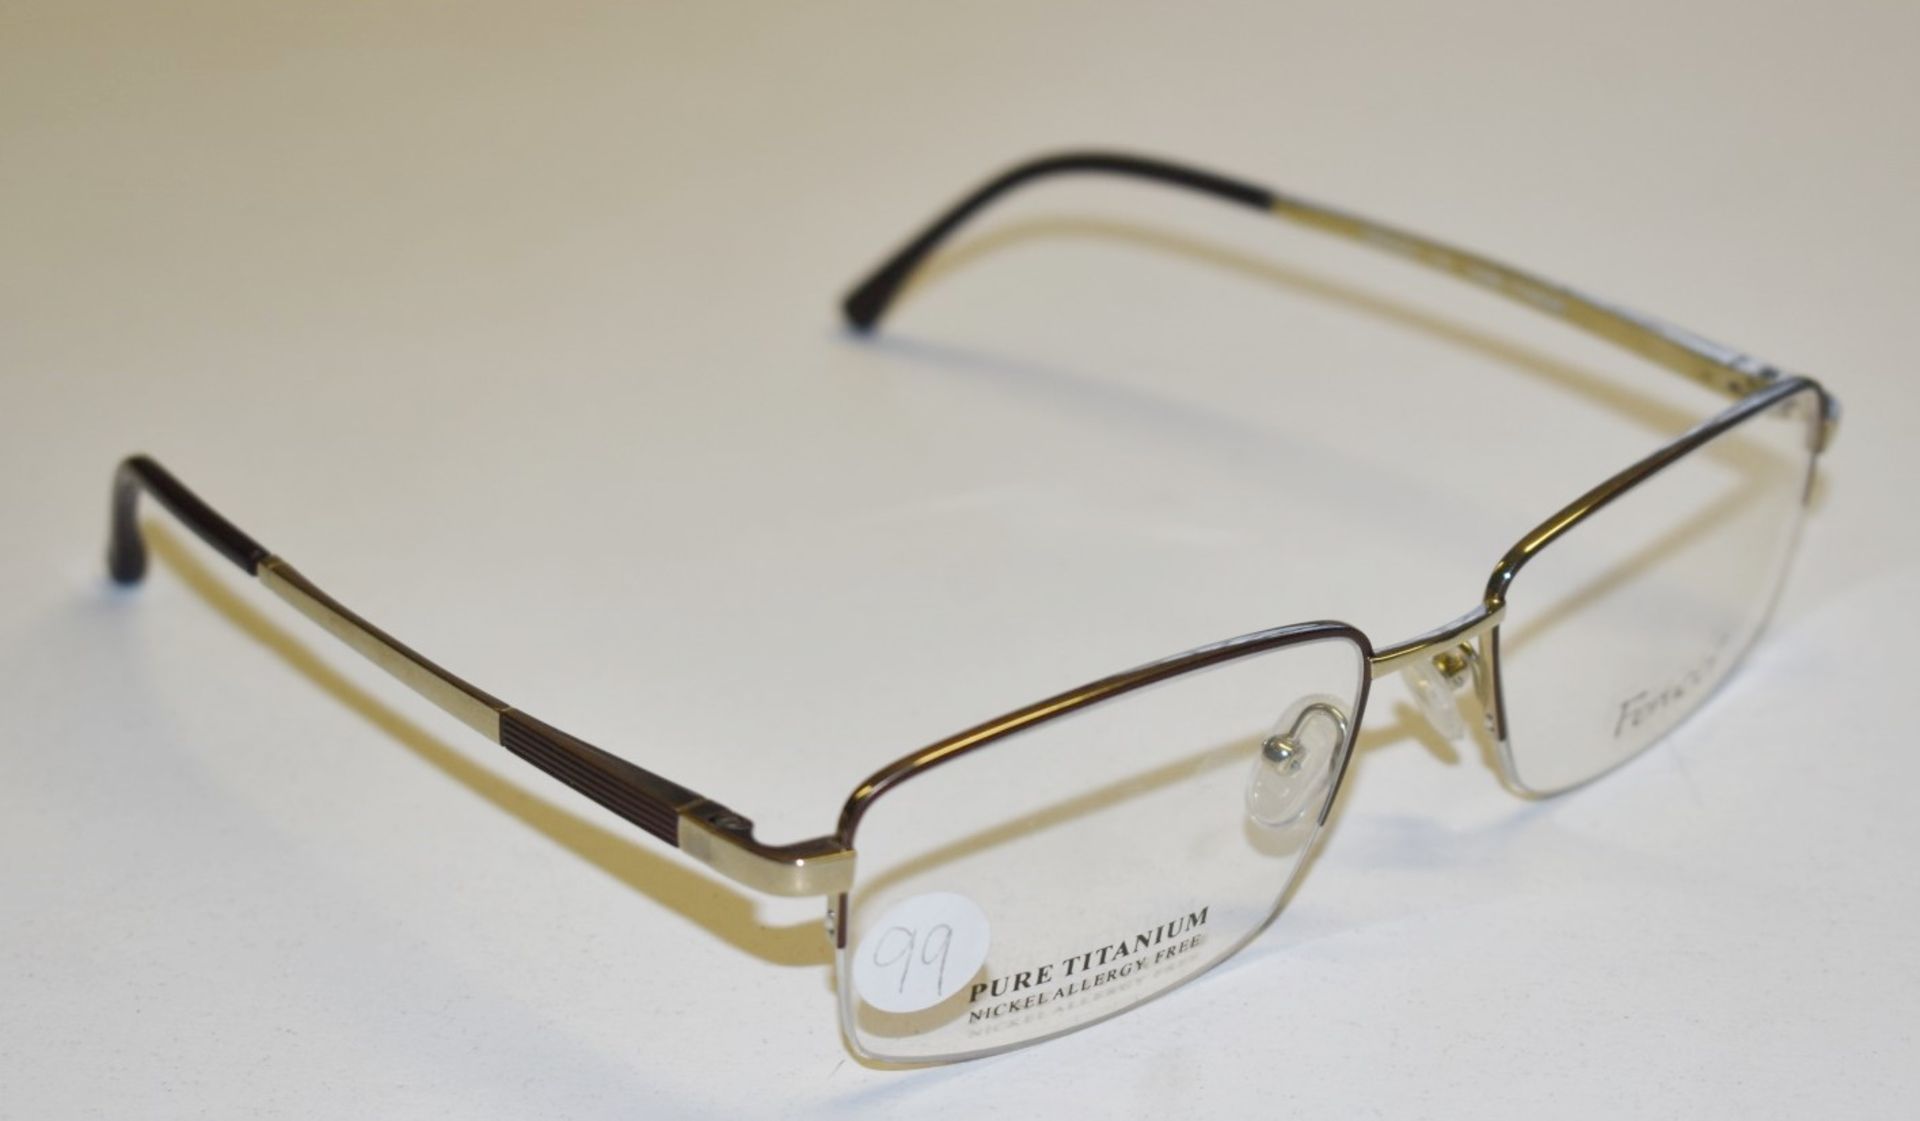 1 x Genuine FERUCCI Spectacle Eye Glasses Frame - Ex Display Stock  - Ref: GTI182 - CL645 -